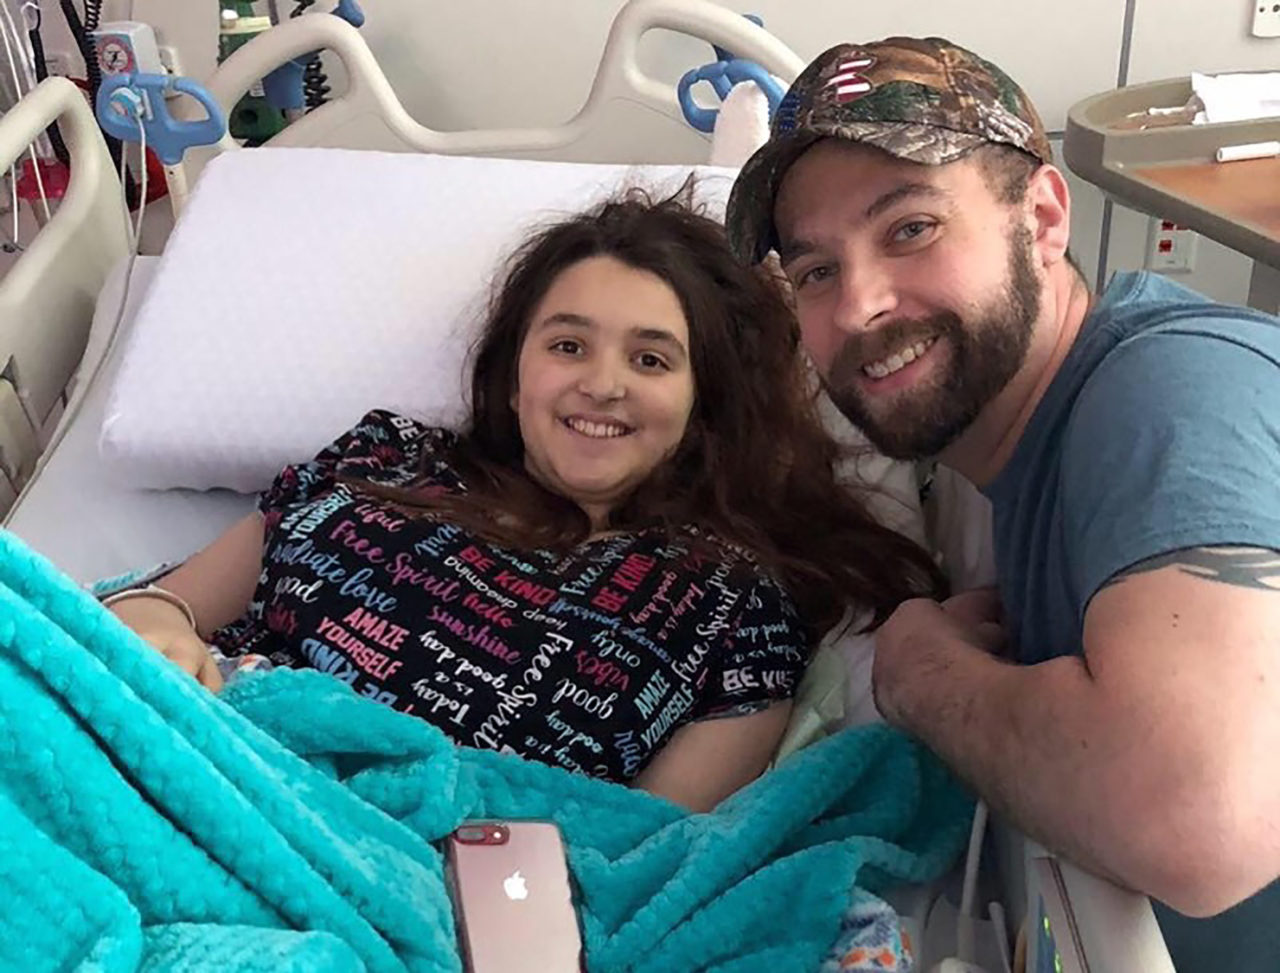 Chloe Cress with father, Shawn. After spending more than a year at St. Jude, Chloe will be making it home for Christmas. (Credit: Shawn Cress)